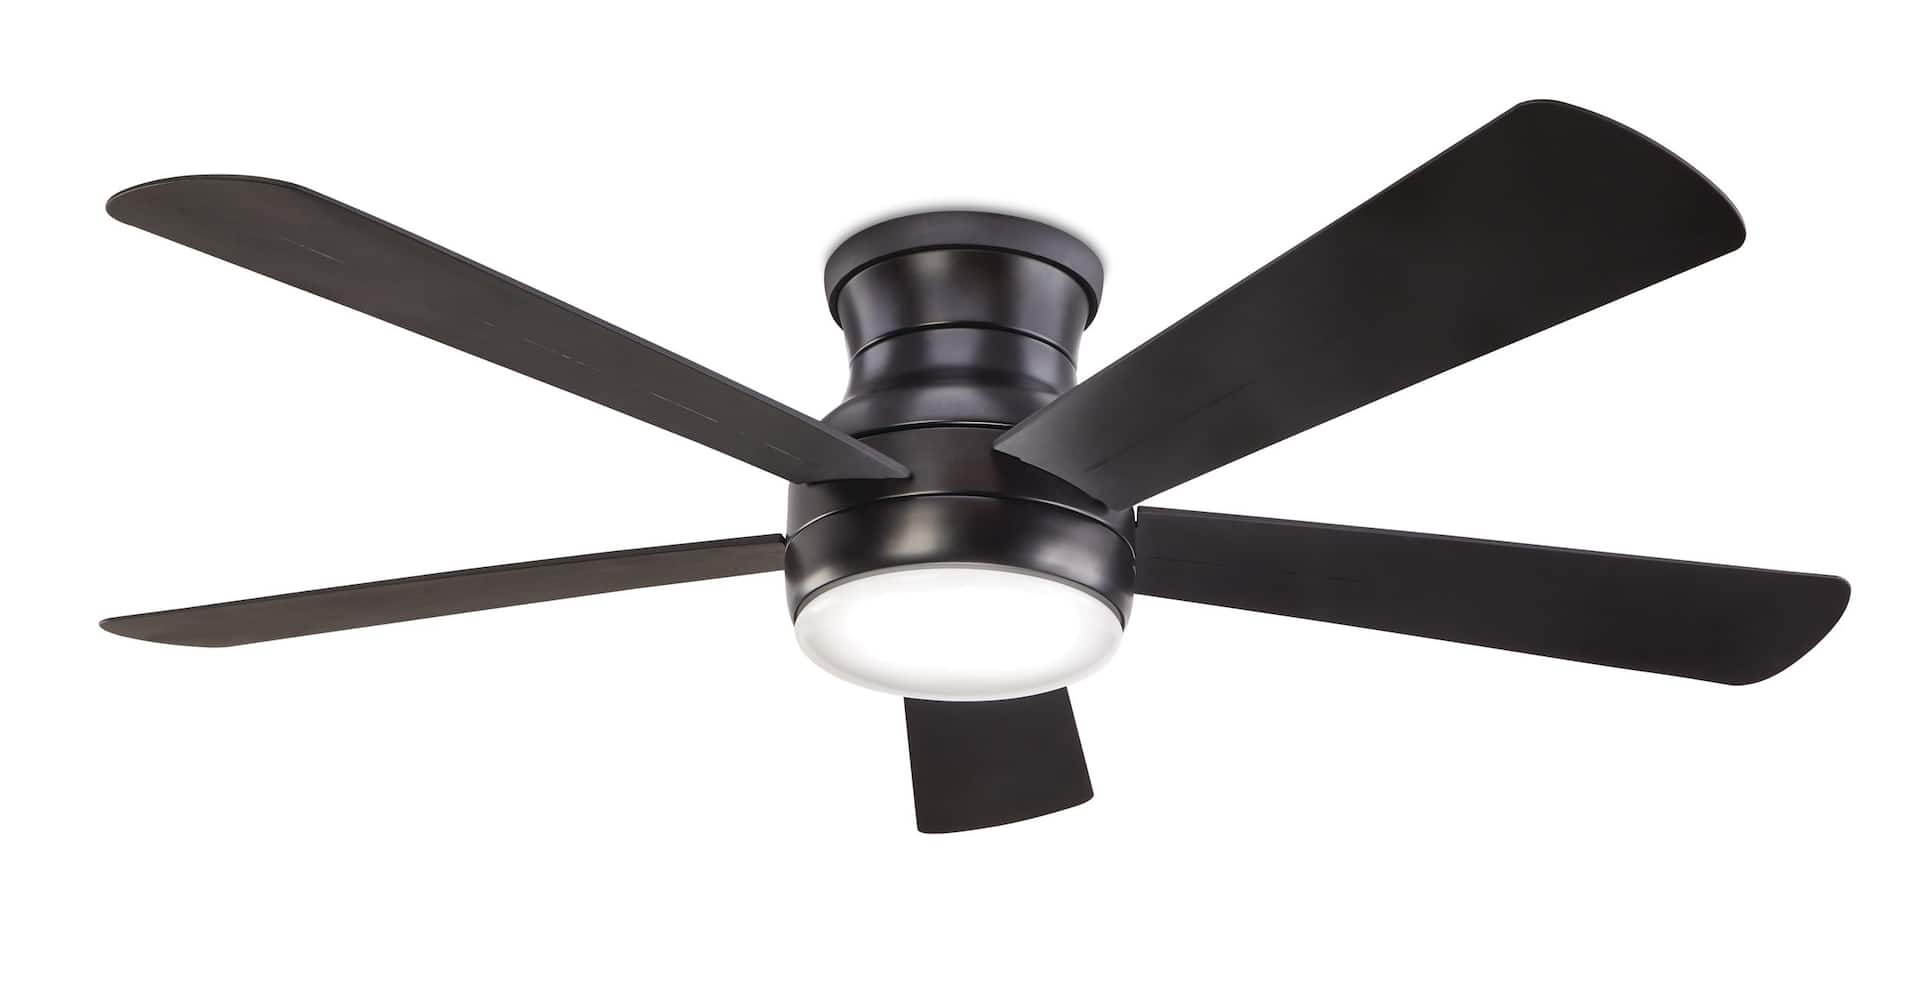 NOMA Milton 5-Reversible blade 6-Speed Ceiling Fan with LED Light